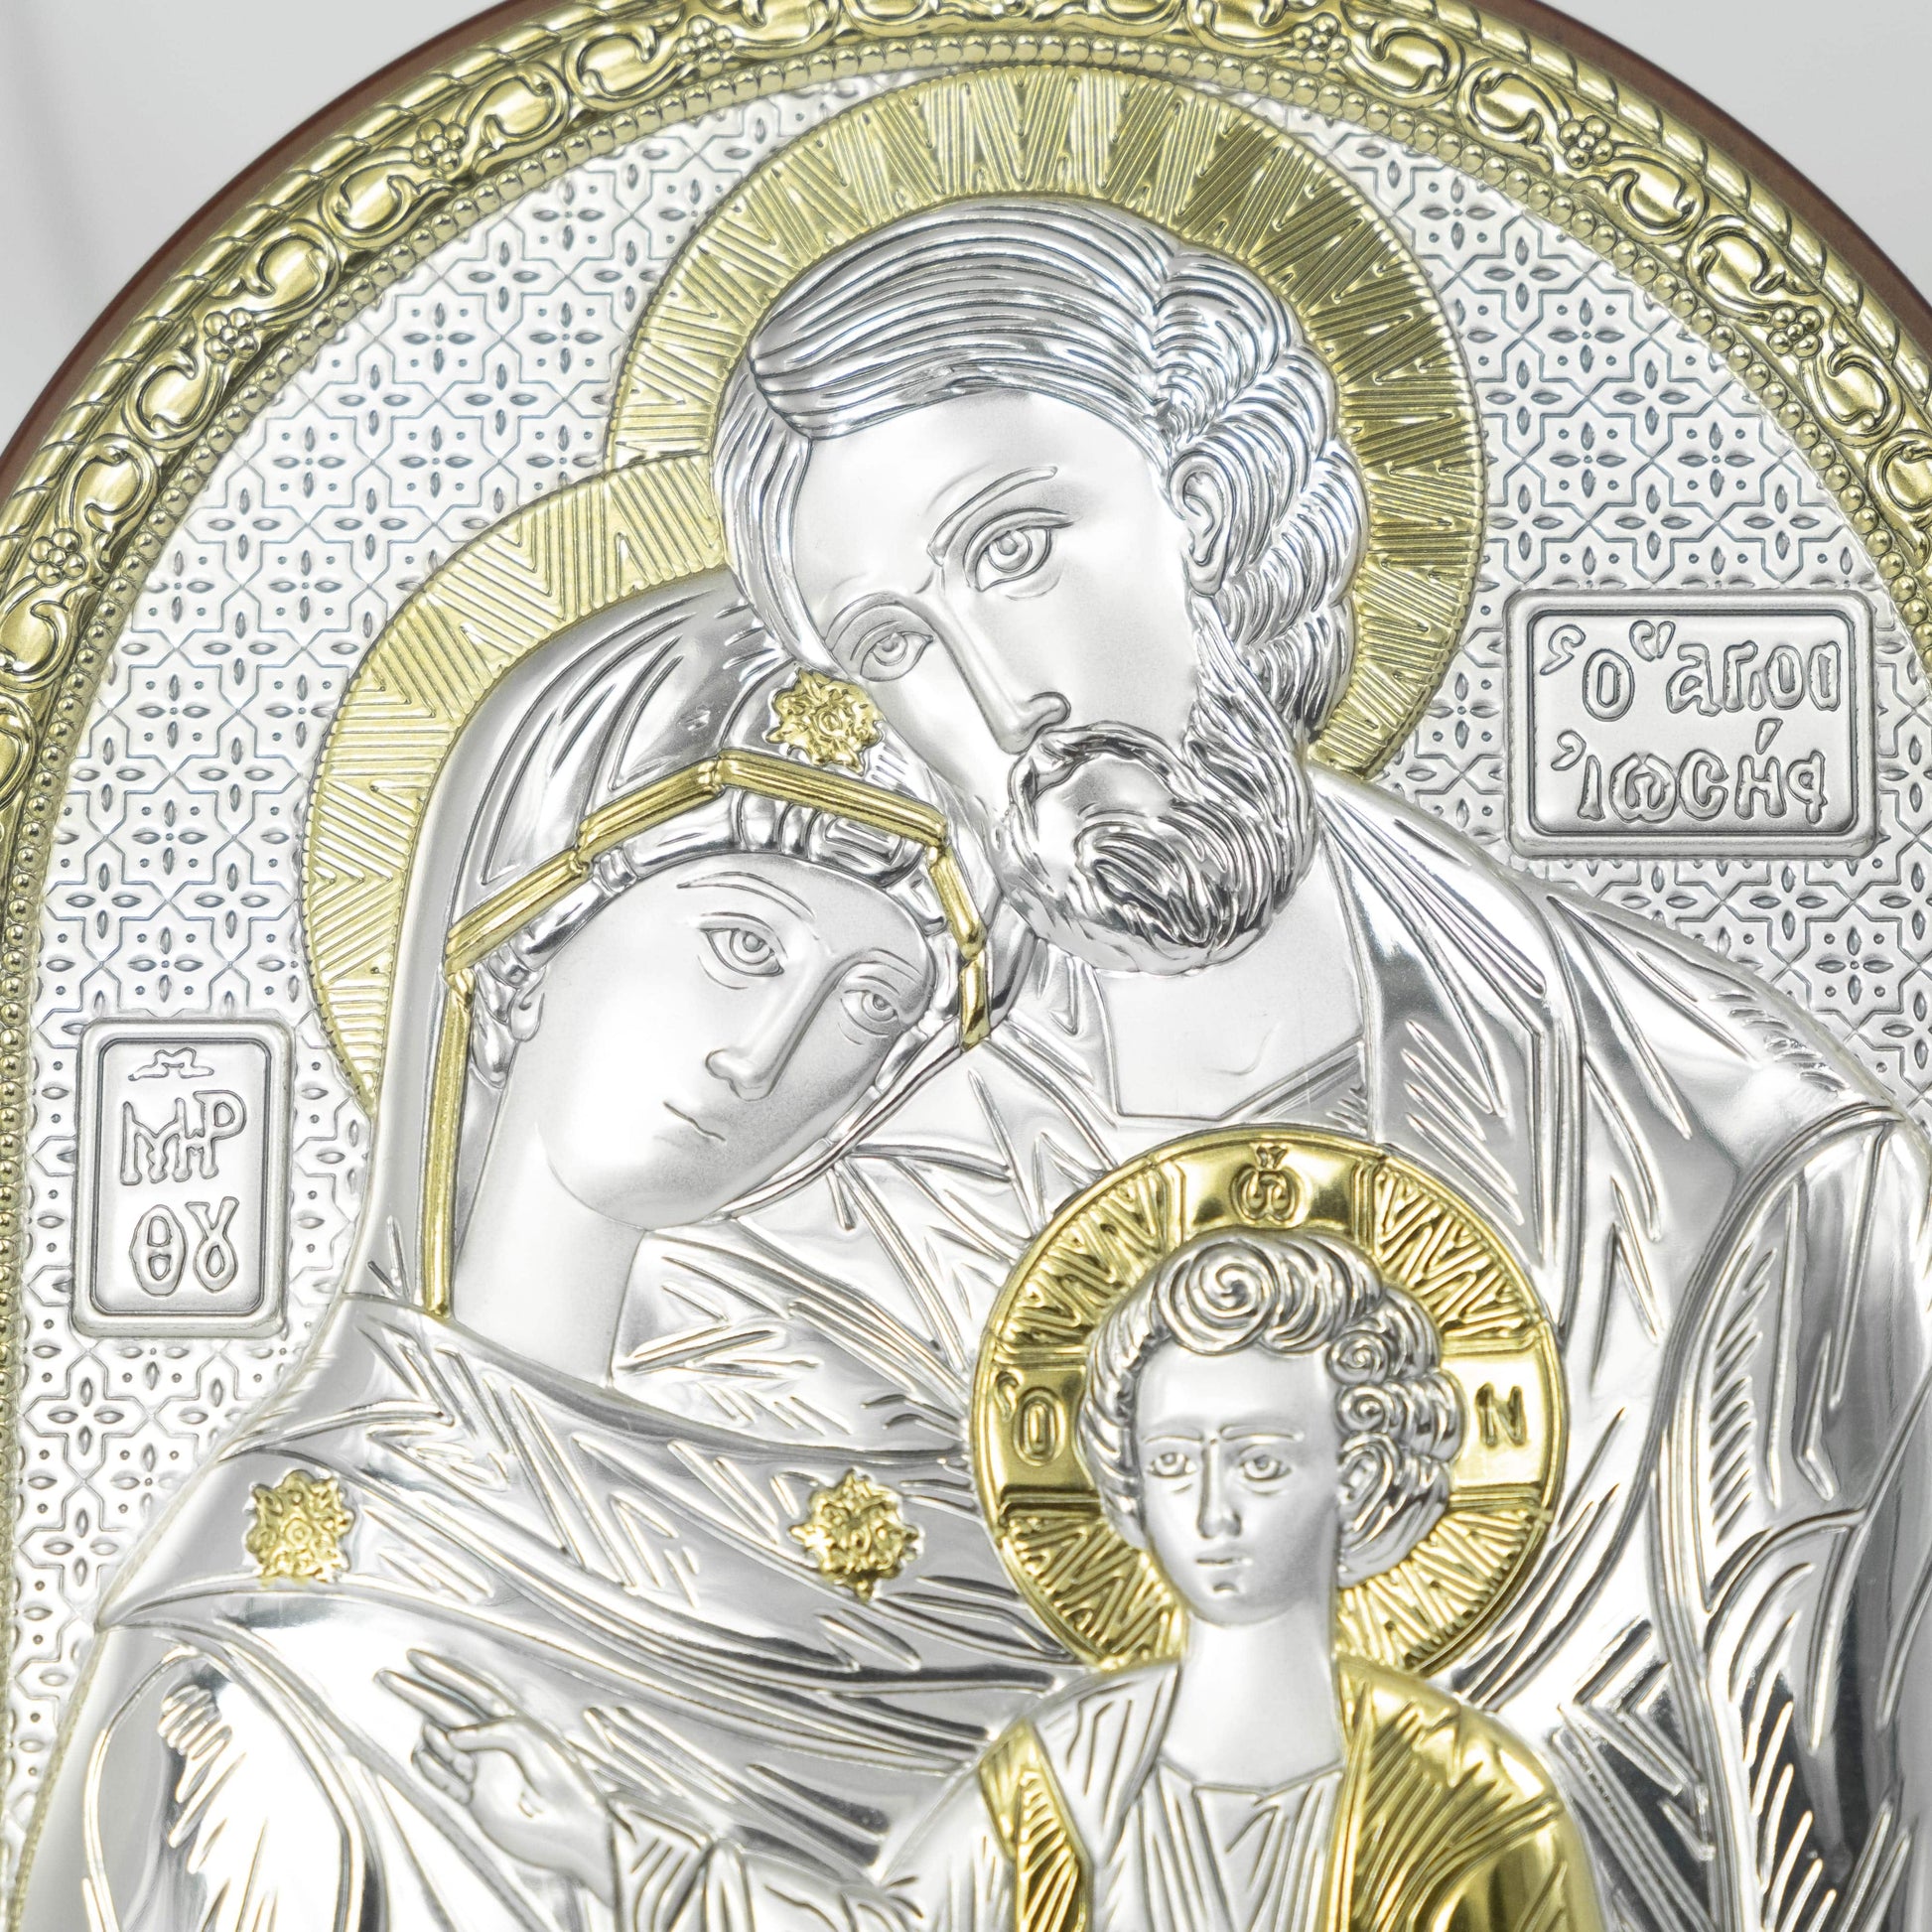 MONDO CATTOLICO Sacred Family Bilaminated Sterling Silver Painting with Golden Details